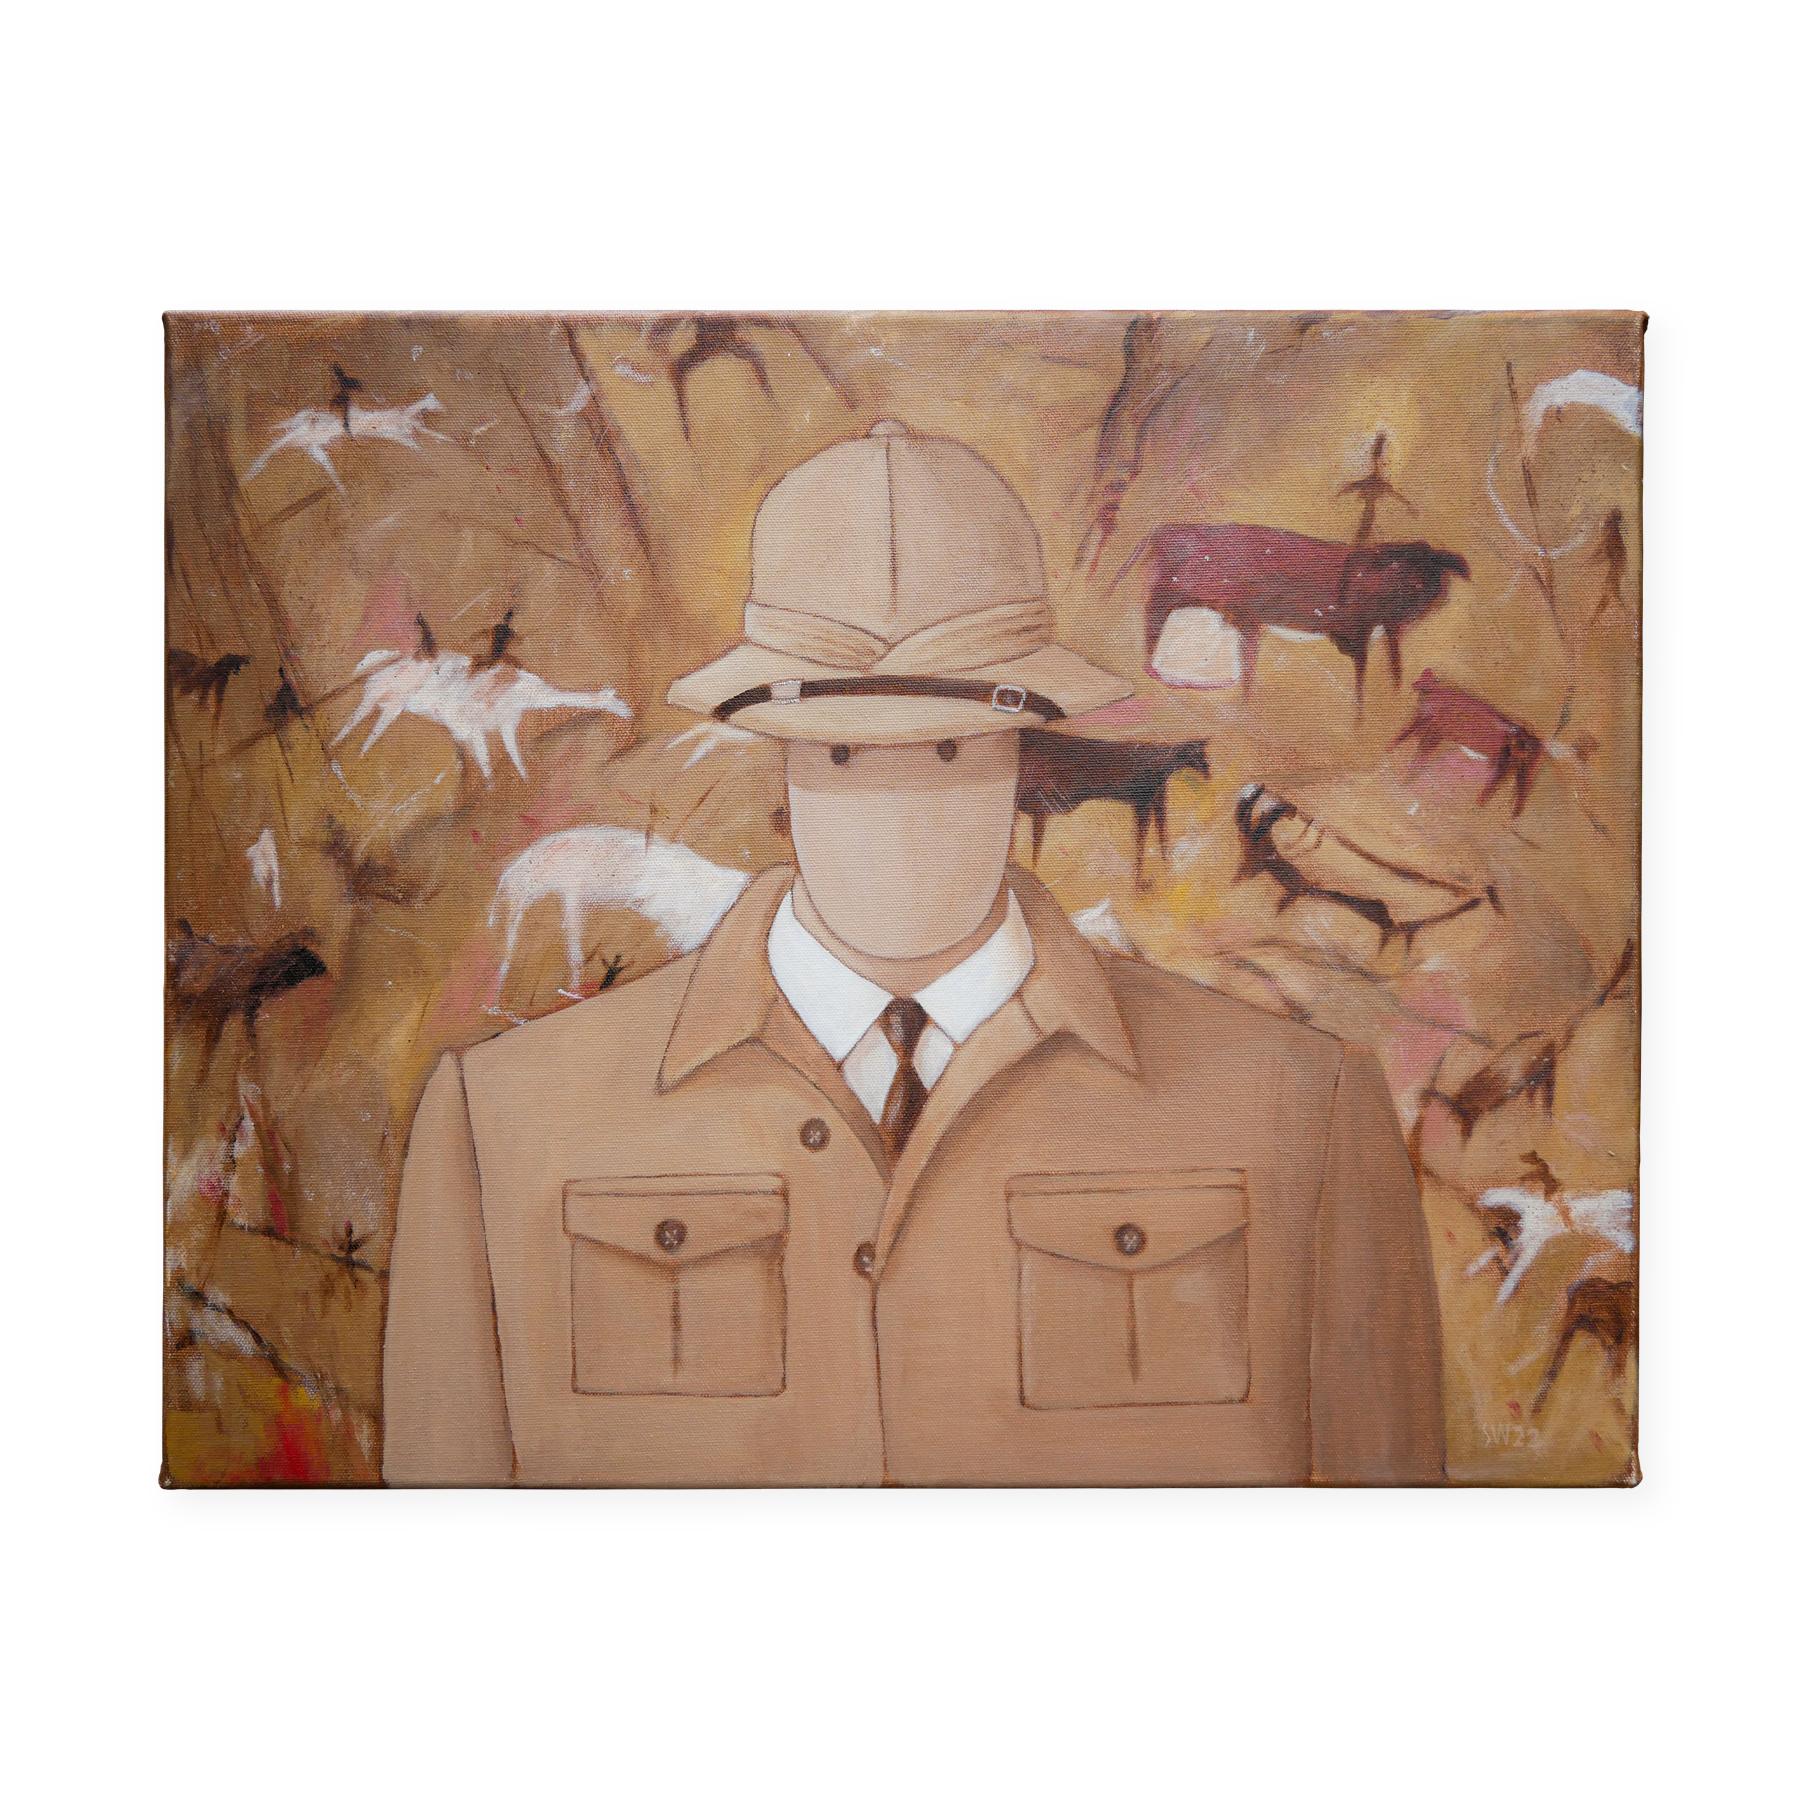 Brown abstract figurative painting by Houston, TX artist Scott Woodard. The painting depicts a man in a brown coat and hat against the Lascaux cave paintings in France. Signed by the artist at the bottom right. Titled and dated at the back. Unframed